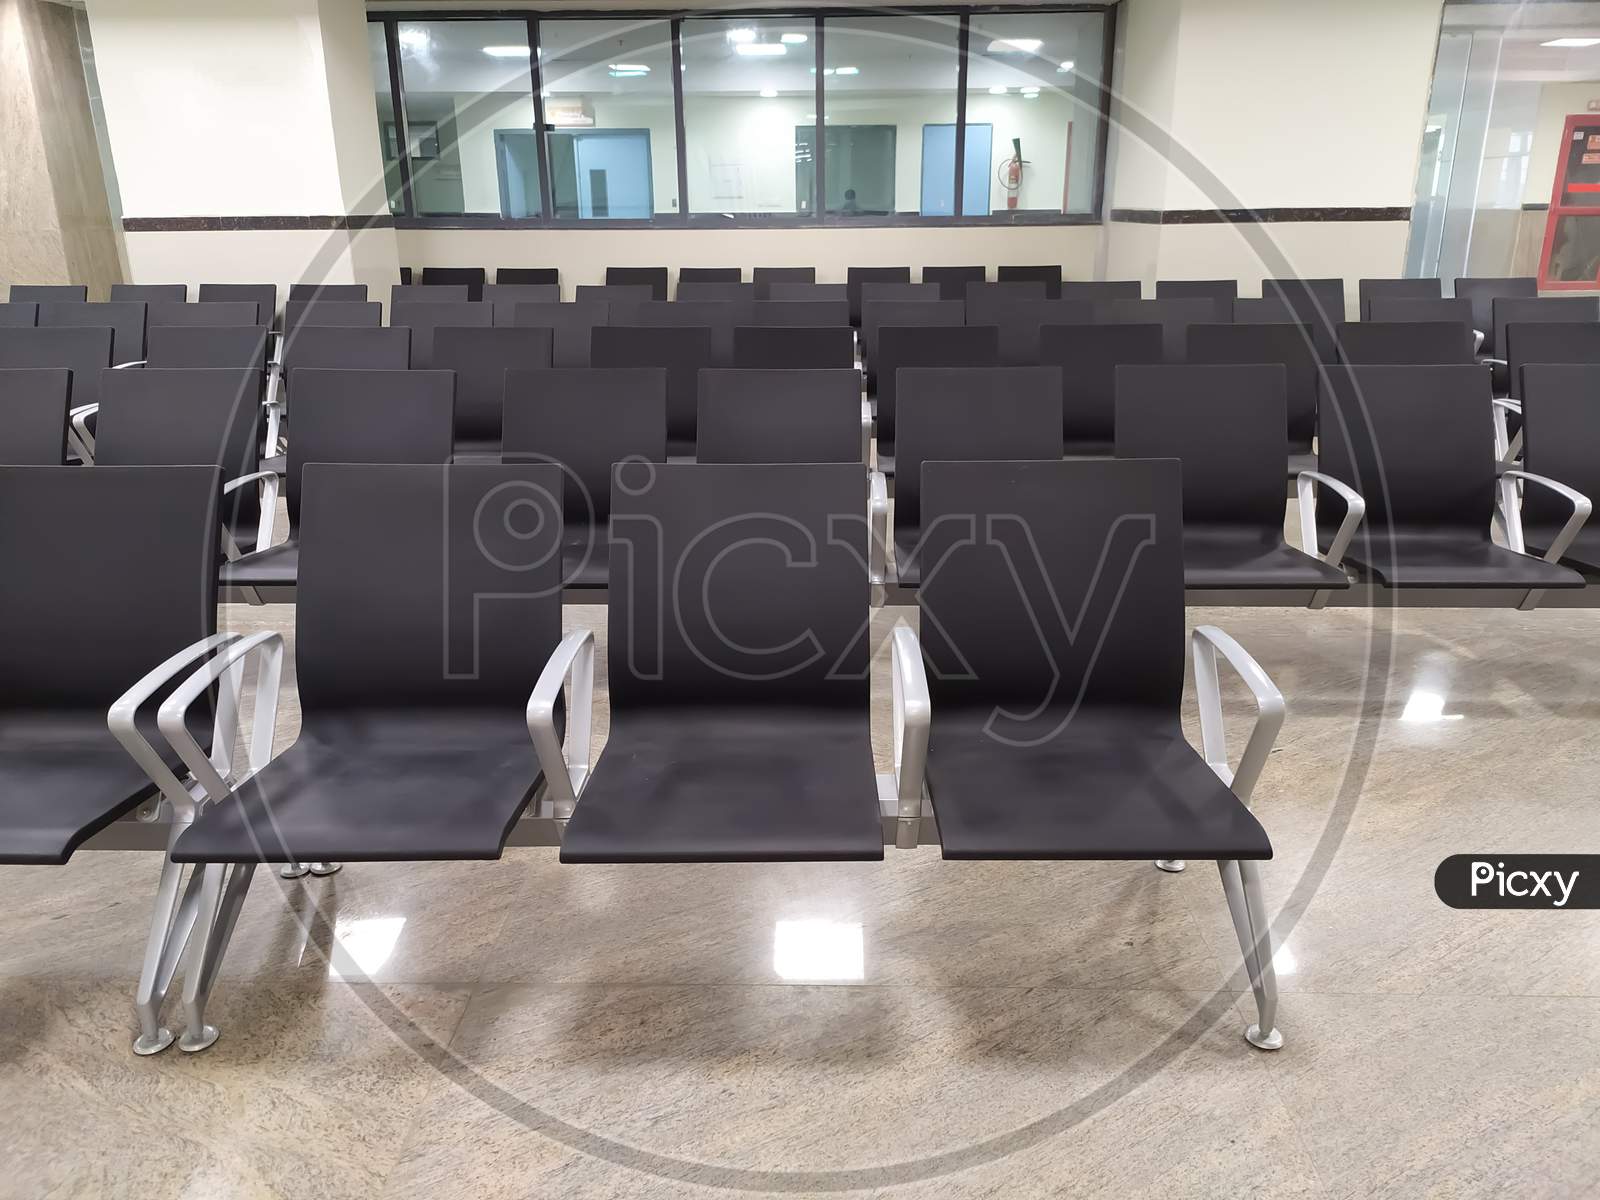 This is a Black Chairs in Office Room